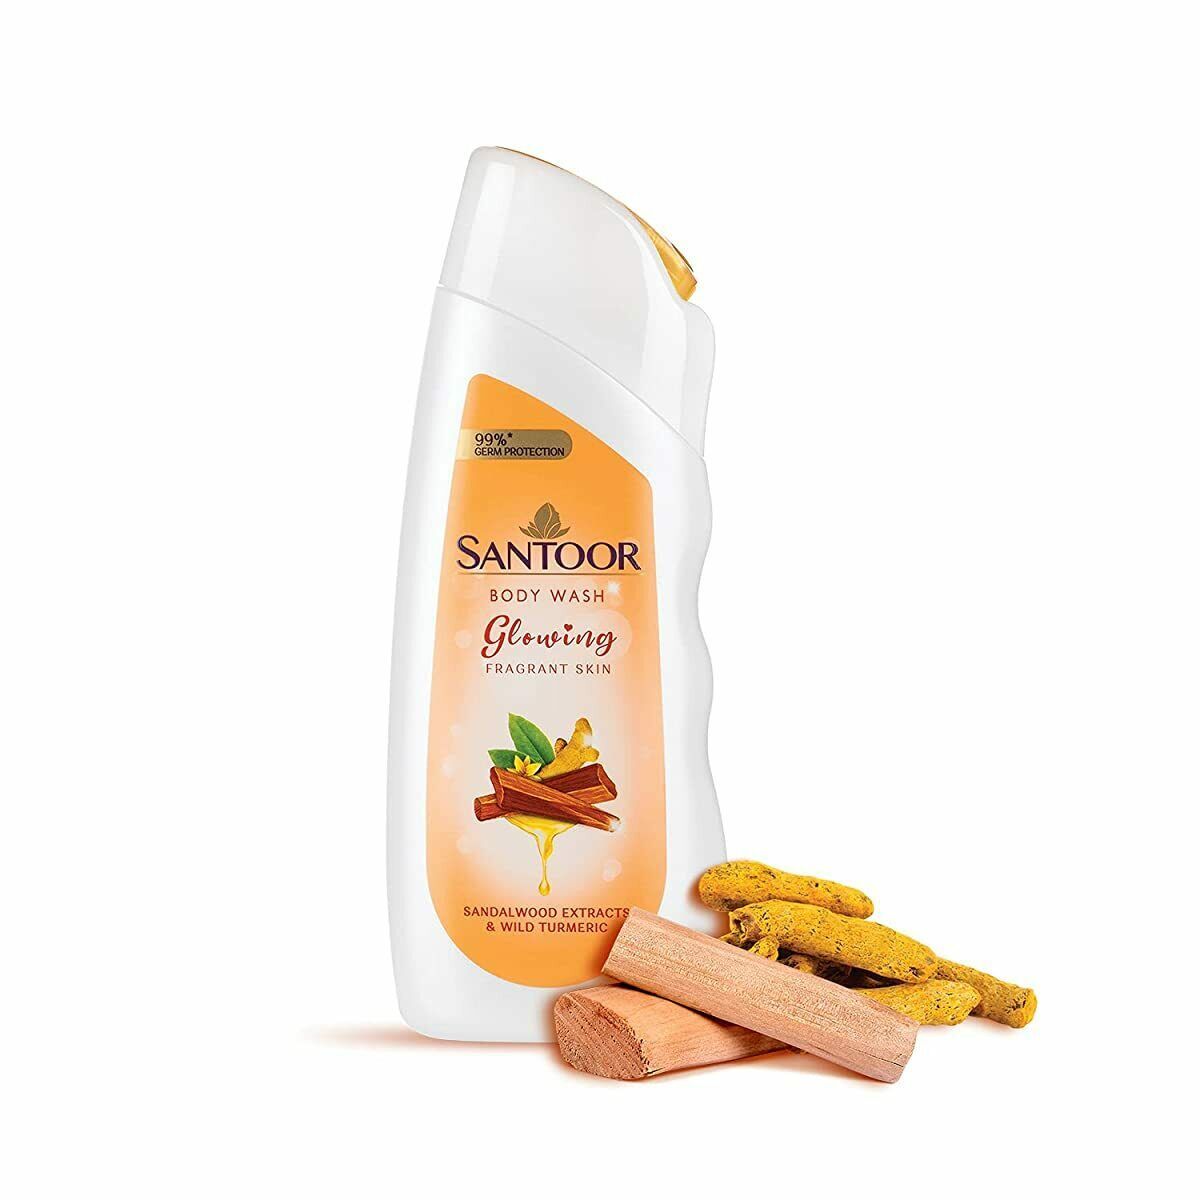 Santoor Glowing Skin Body Wash Enriched With Sandalwood Extracts, 230ml